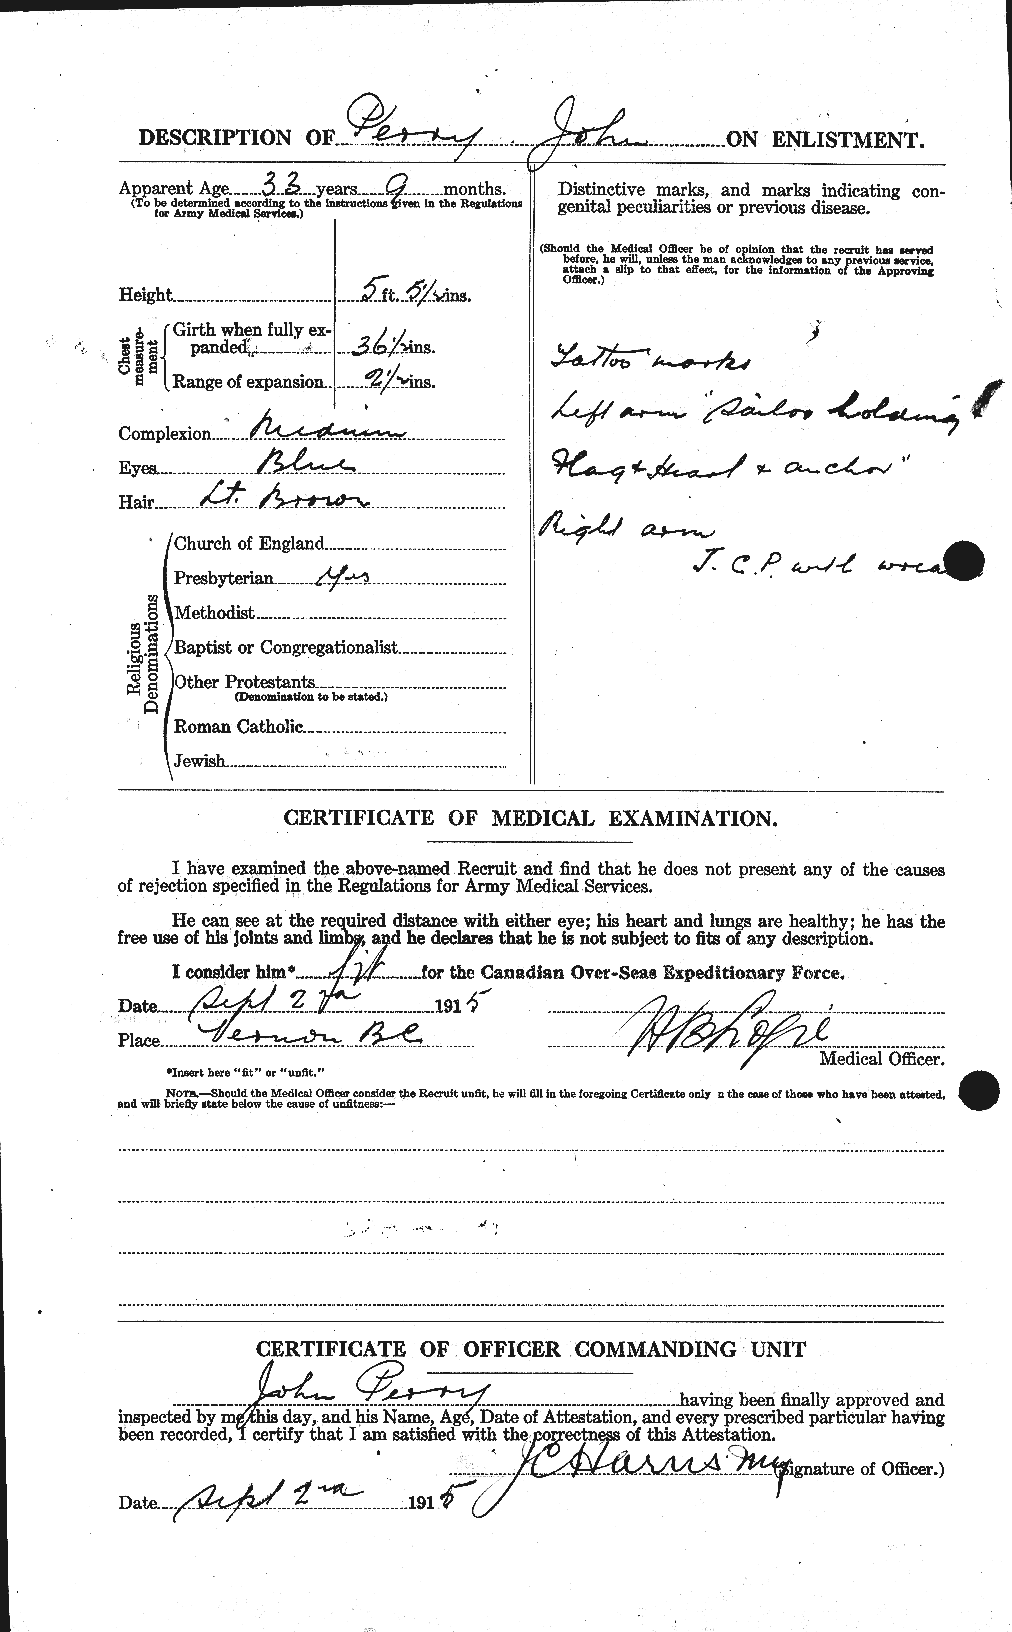 Personnel Records of the First World War - CEF 574933b